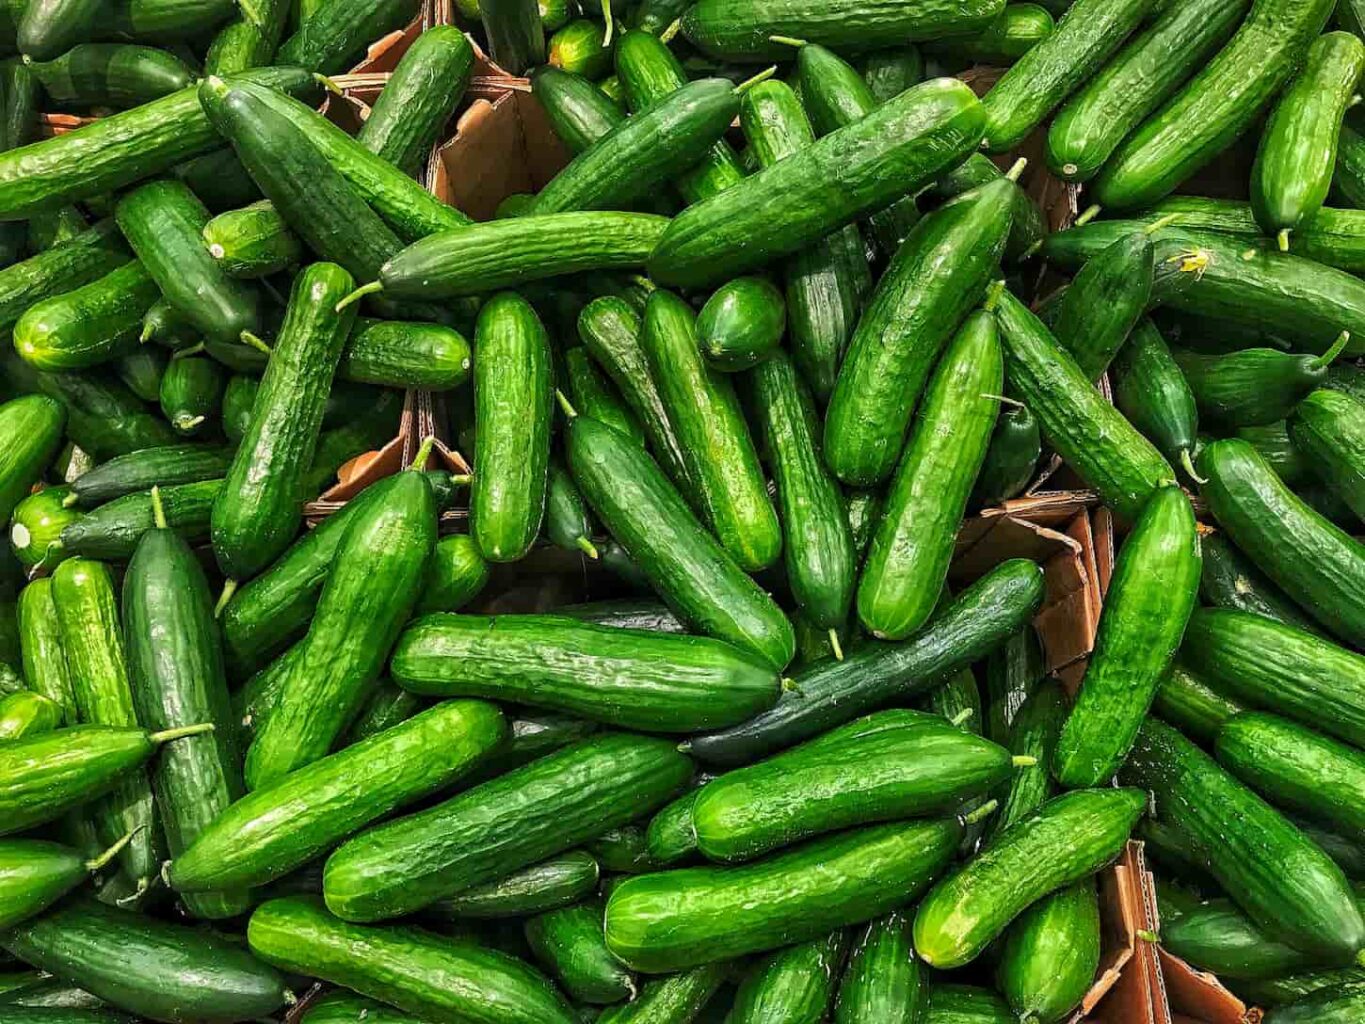 An image of freshly harvested cucumbers from the field.